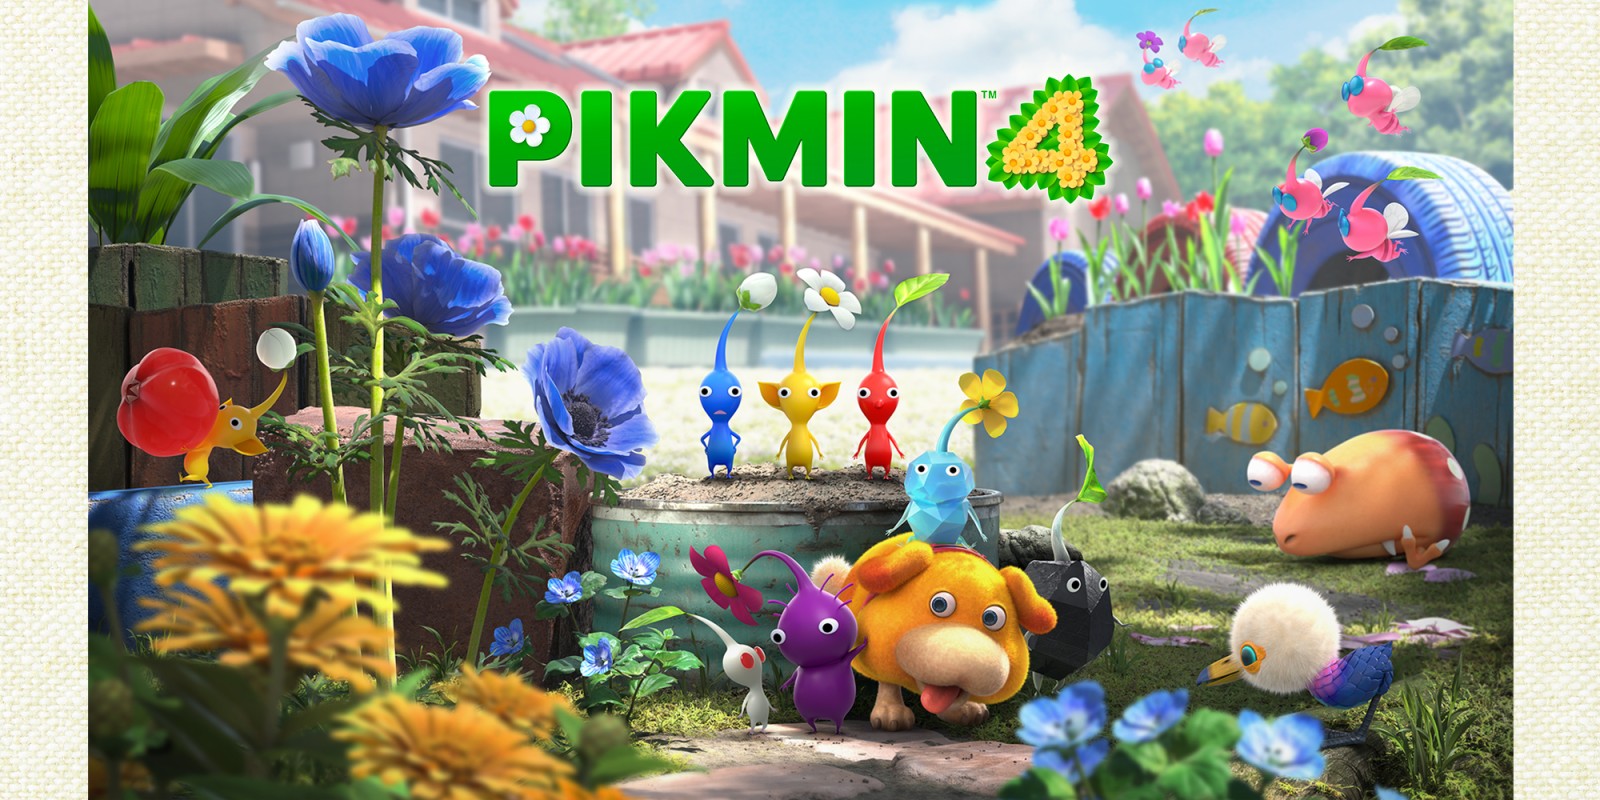 La5t Game You Fini5hed And Your Thought5 - Page 25 2x1_NSwitch_Pikmin4_image1600w